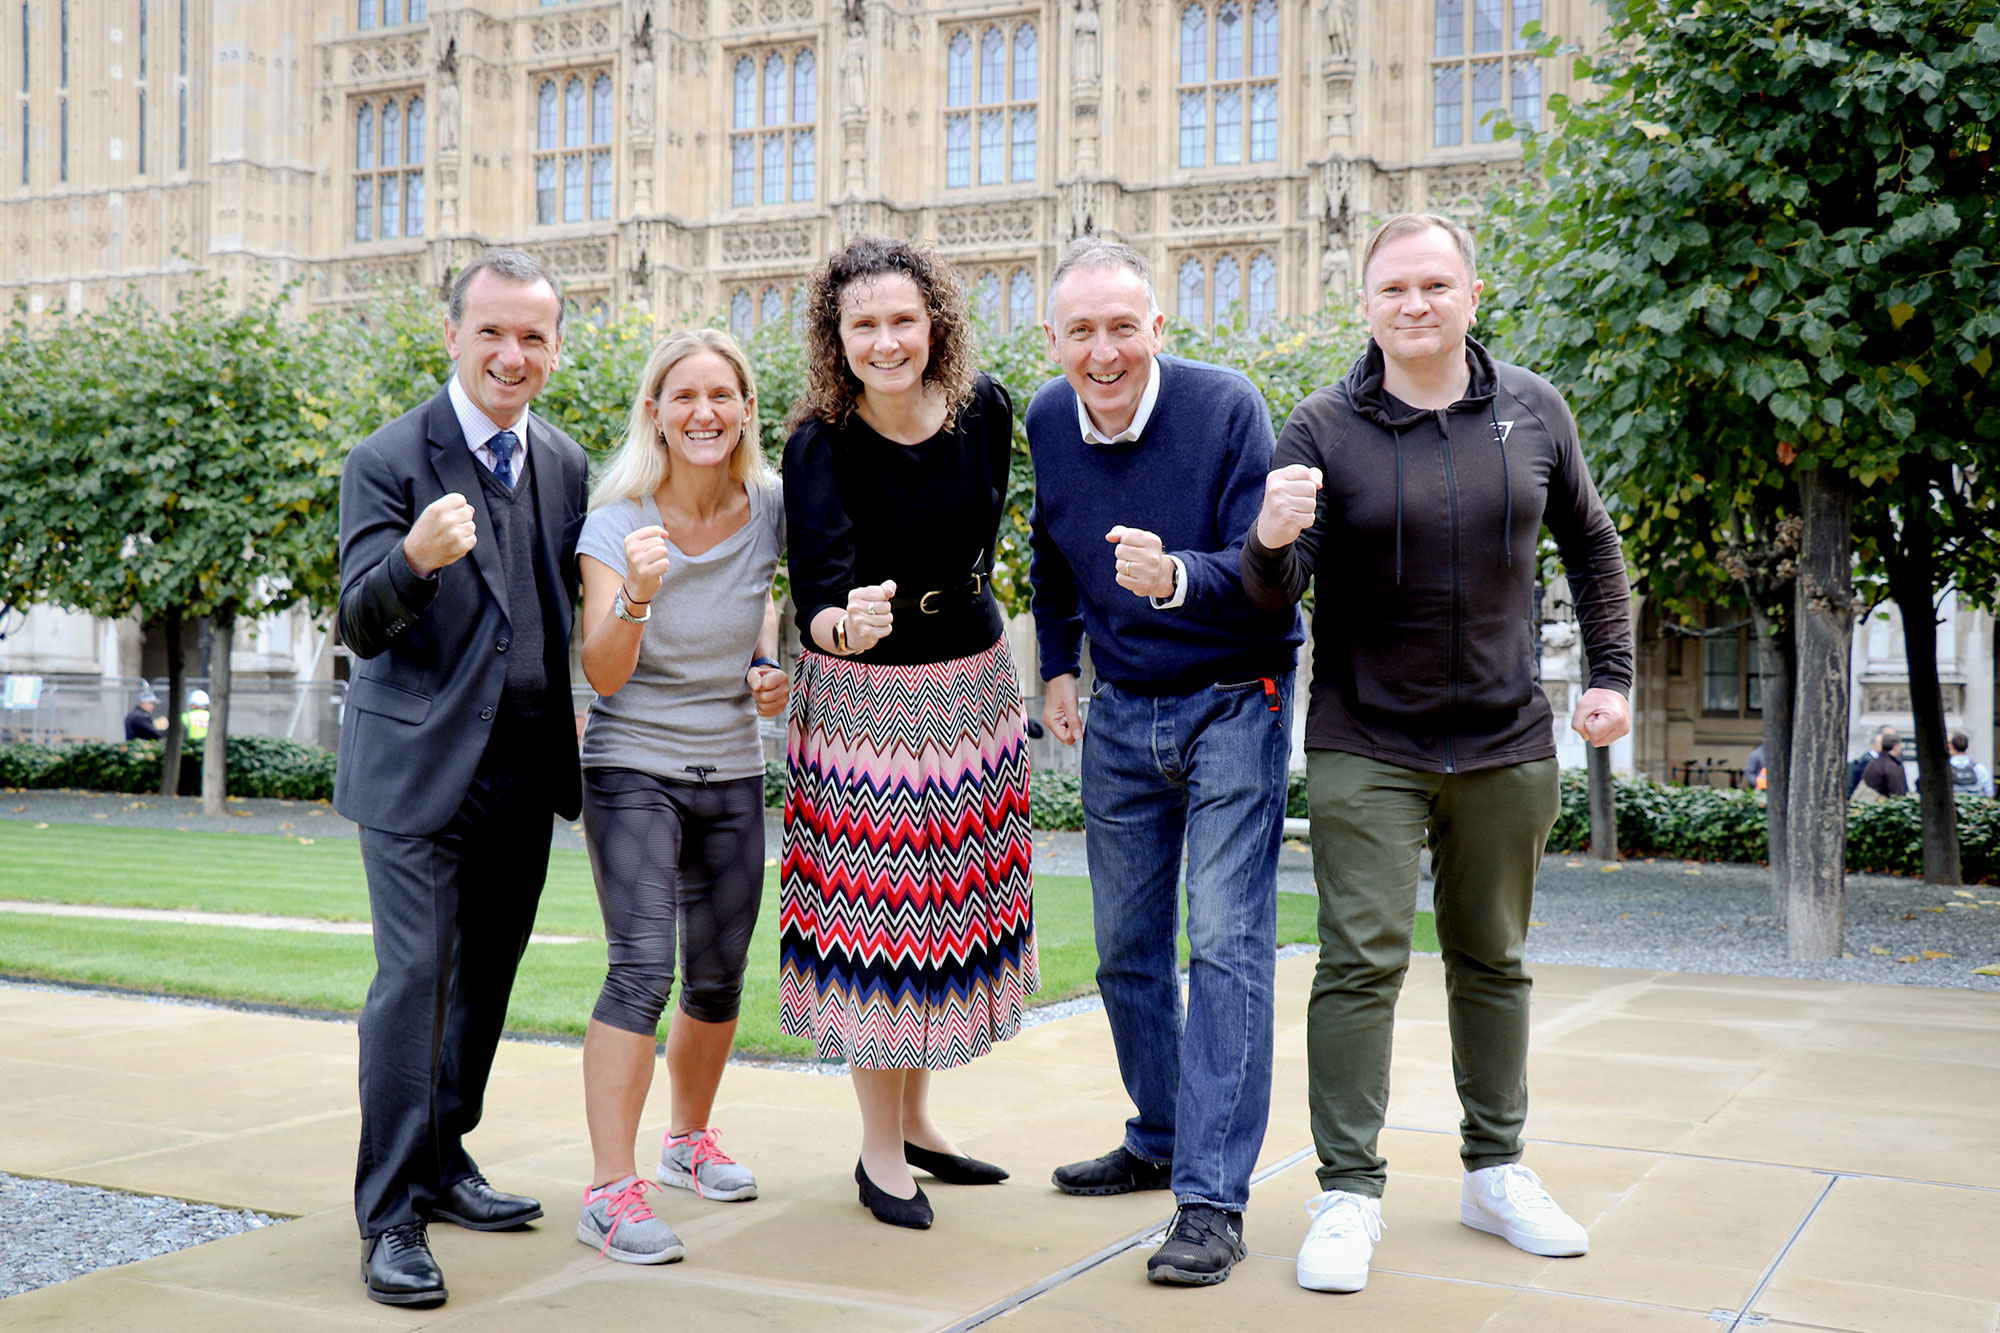 ukactive and Myzone announce winners of inaugural Parliamentary Physical Activity Challenge